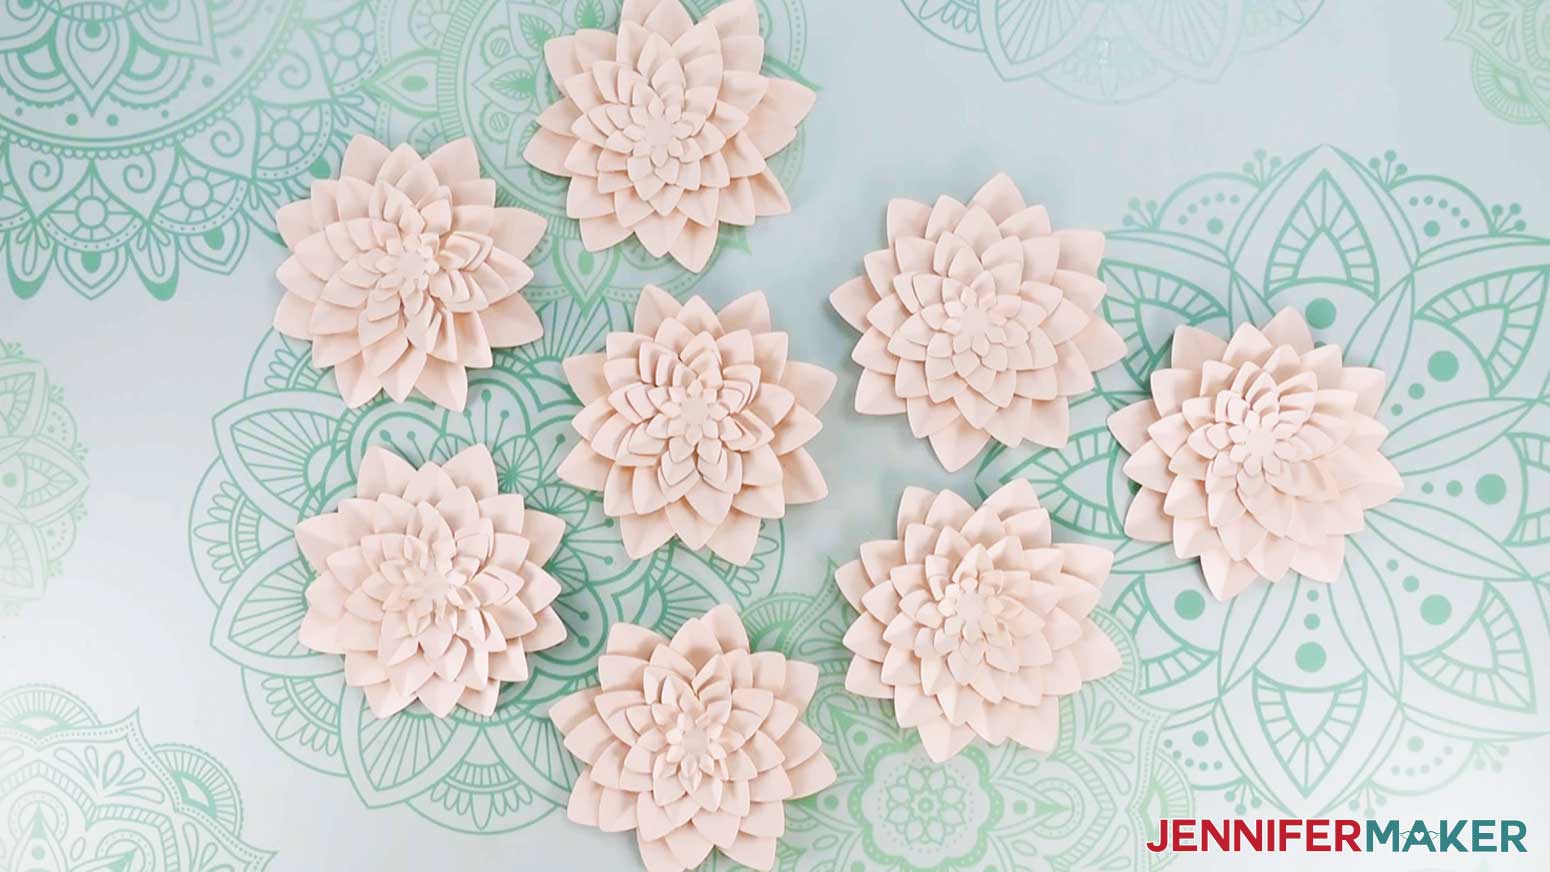 Mini dahlias for the paper flower backdrop layout testing.